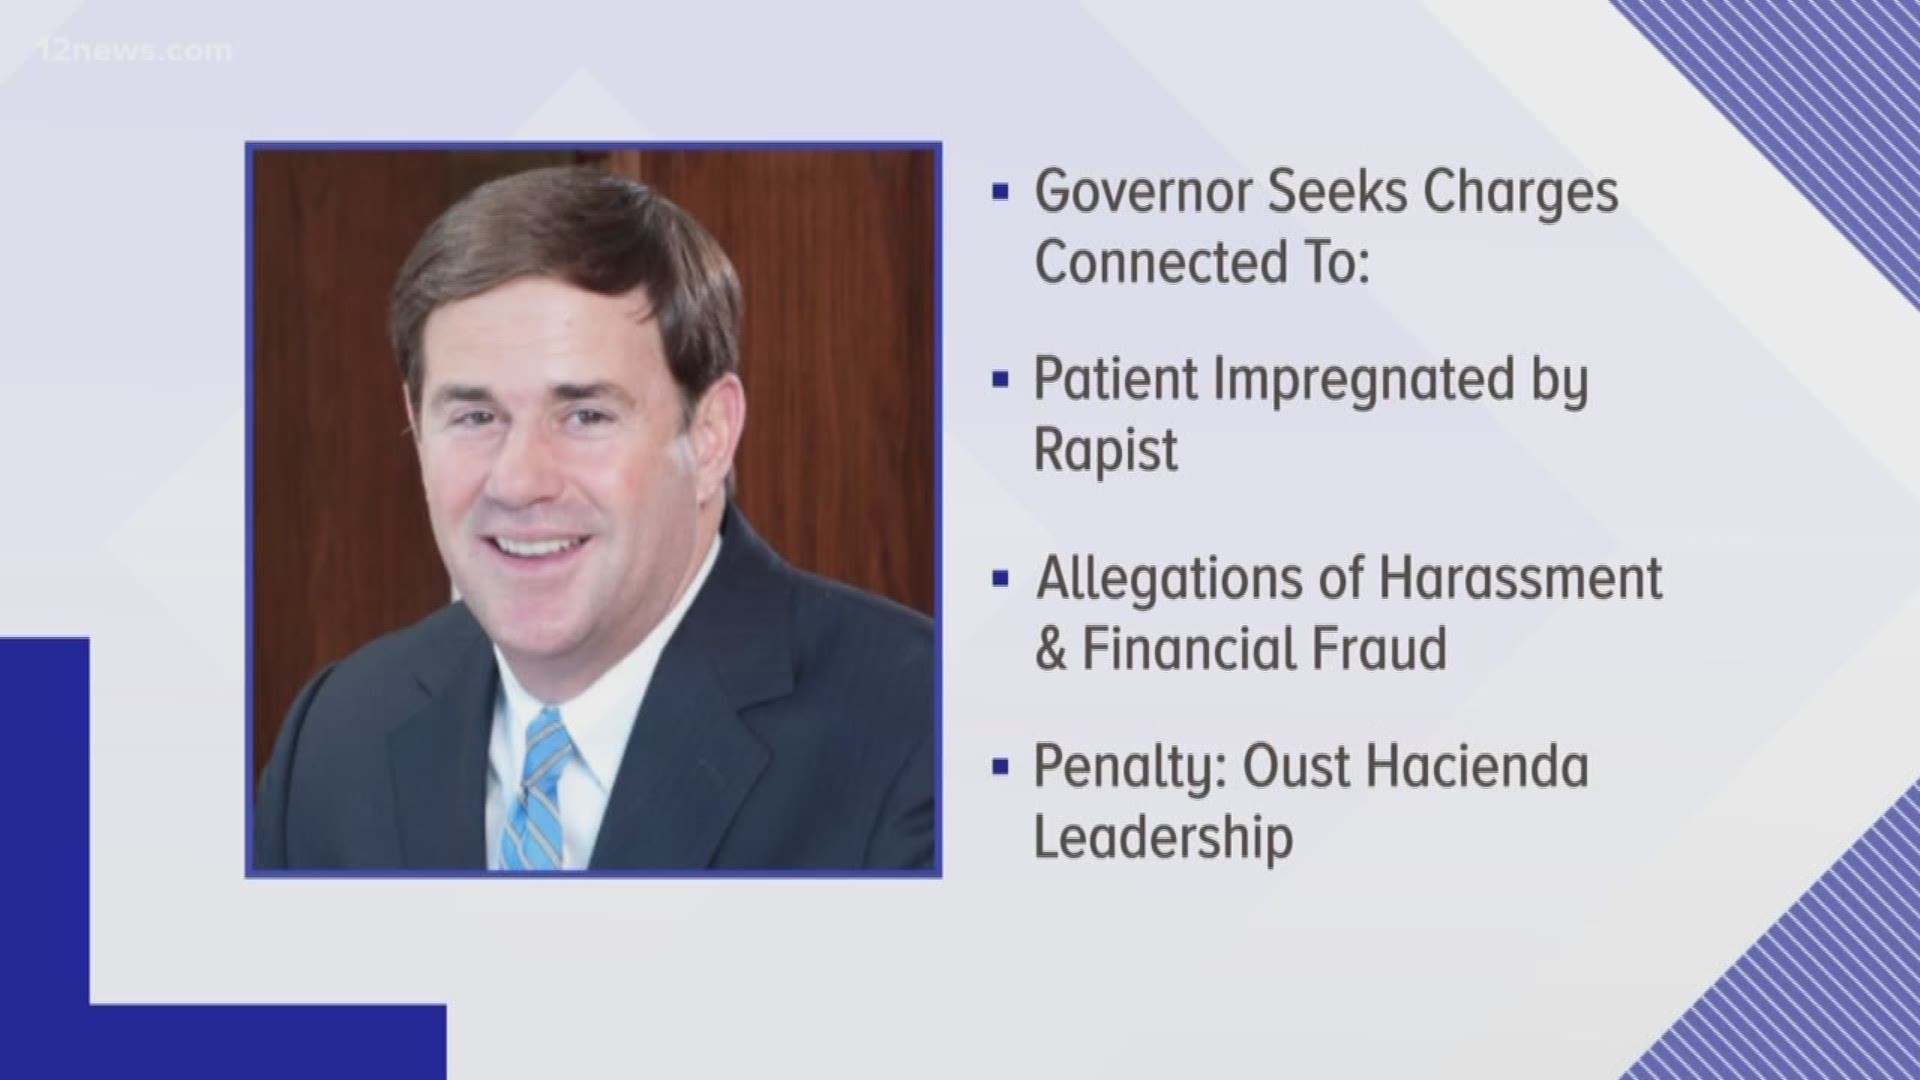 Arizona Gov. Doug Ducey sent a letter calling on Attorney General Mark Brnovich to prosecute the troubled care facility and its top officials on a wide range of charges.